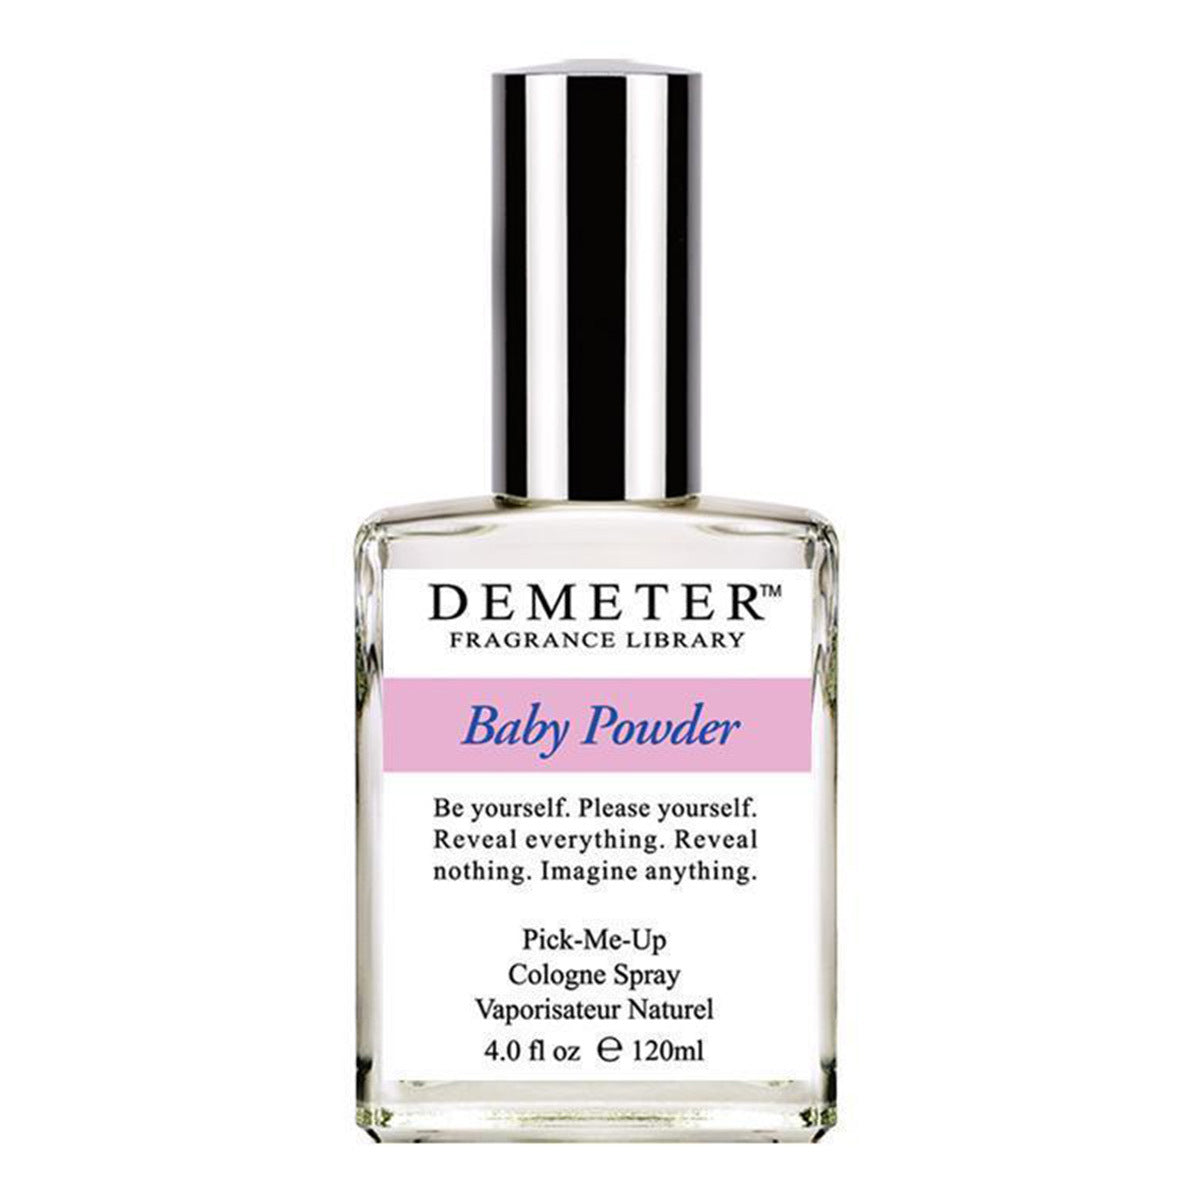 Primary image of Baby Powder Cologne Spray